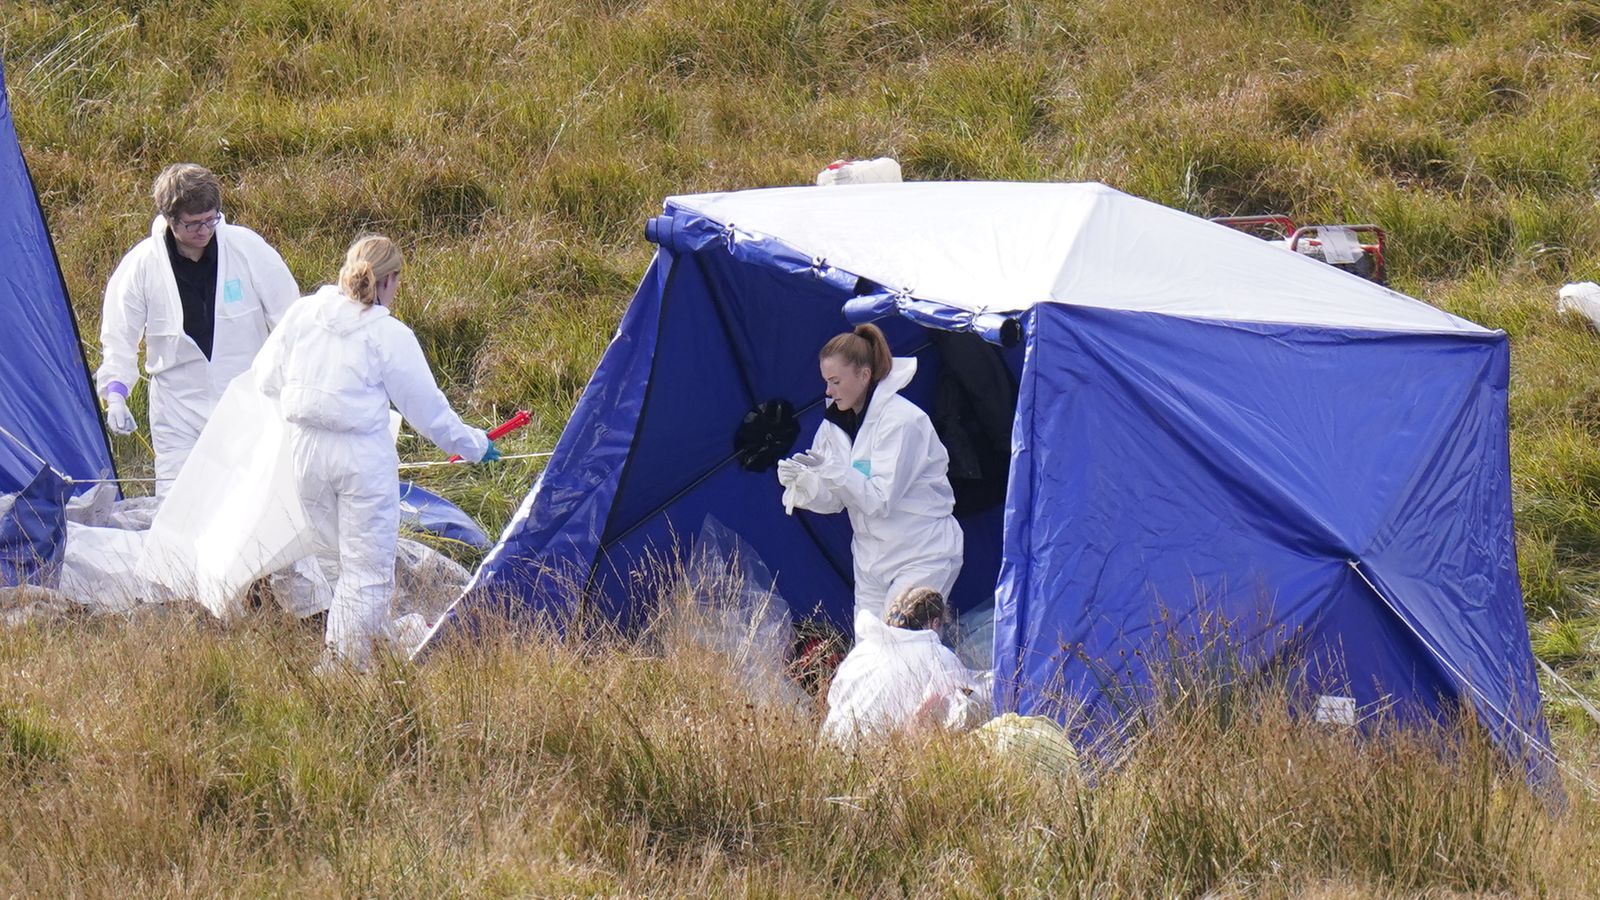 Moors murders: Police end search of site for victim Keith Bennett after no human remains found